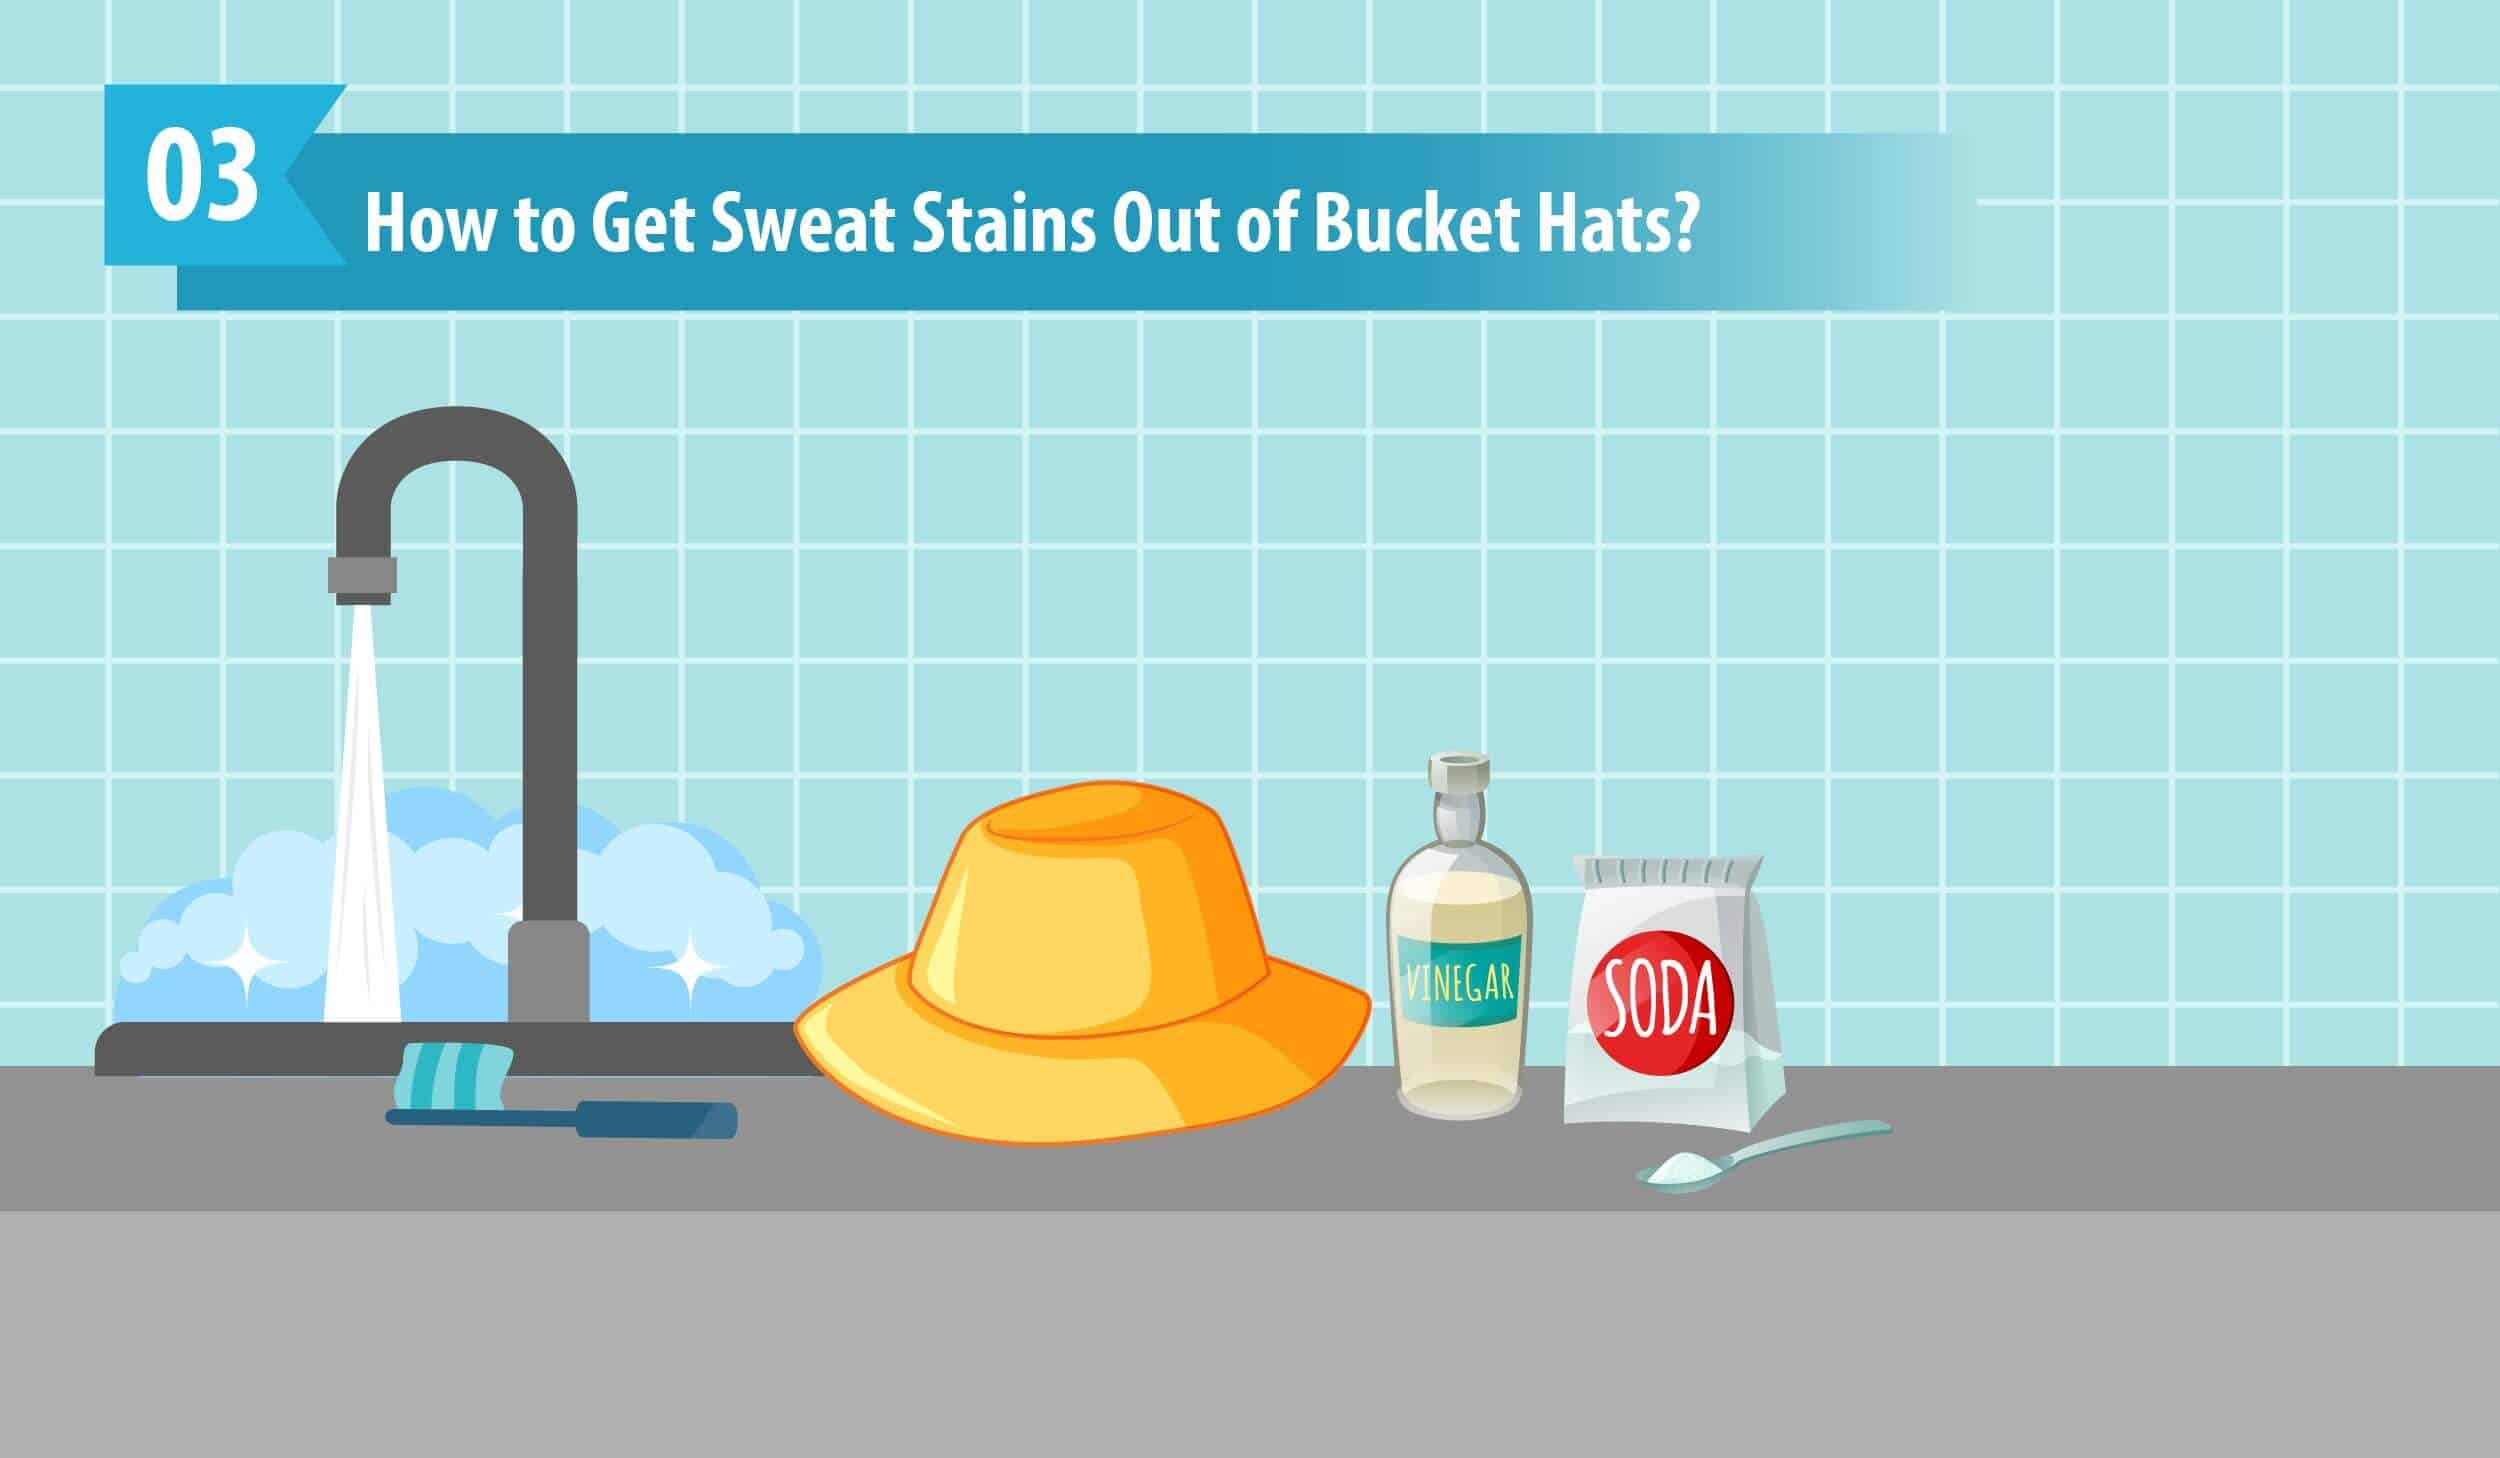 How to Get Sweat Stains Out of Bucket Hats